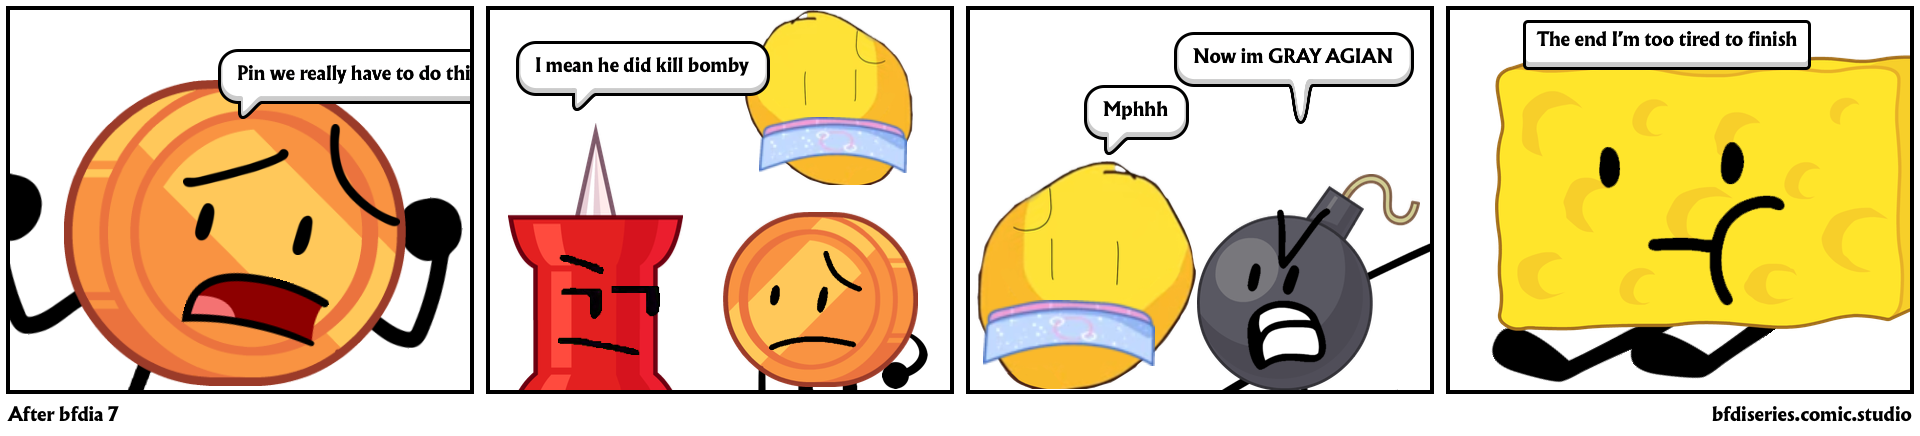 the BFDI assets r petty fun to mess with - Comic Studio